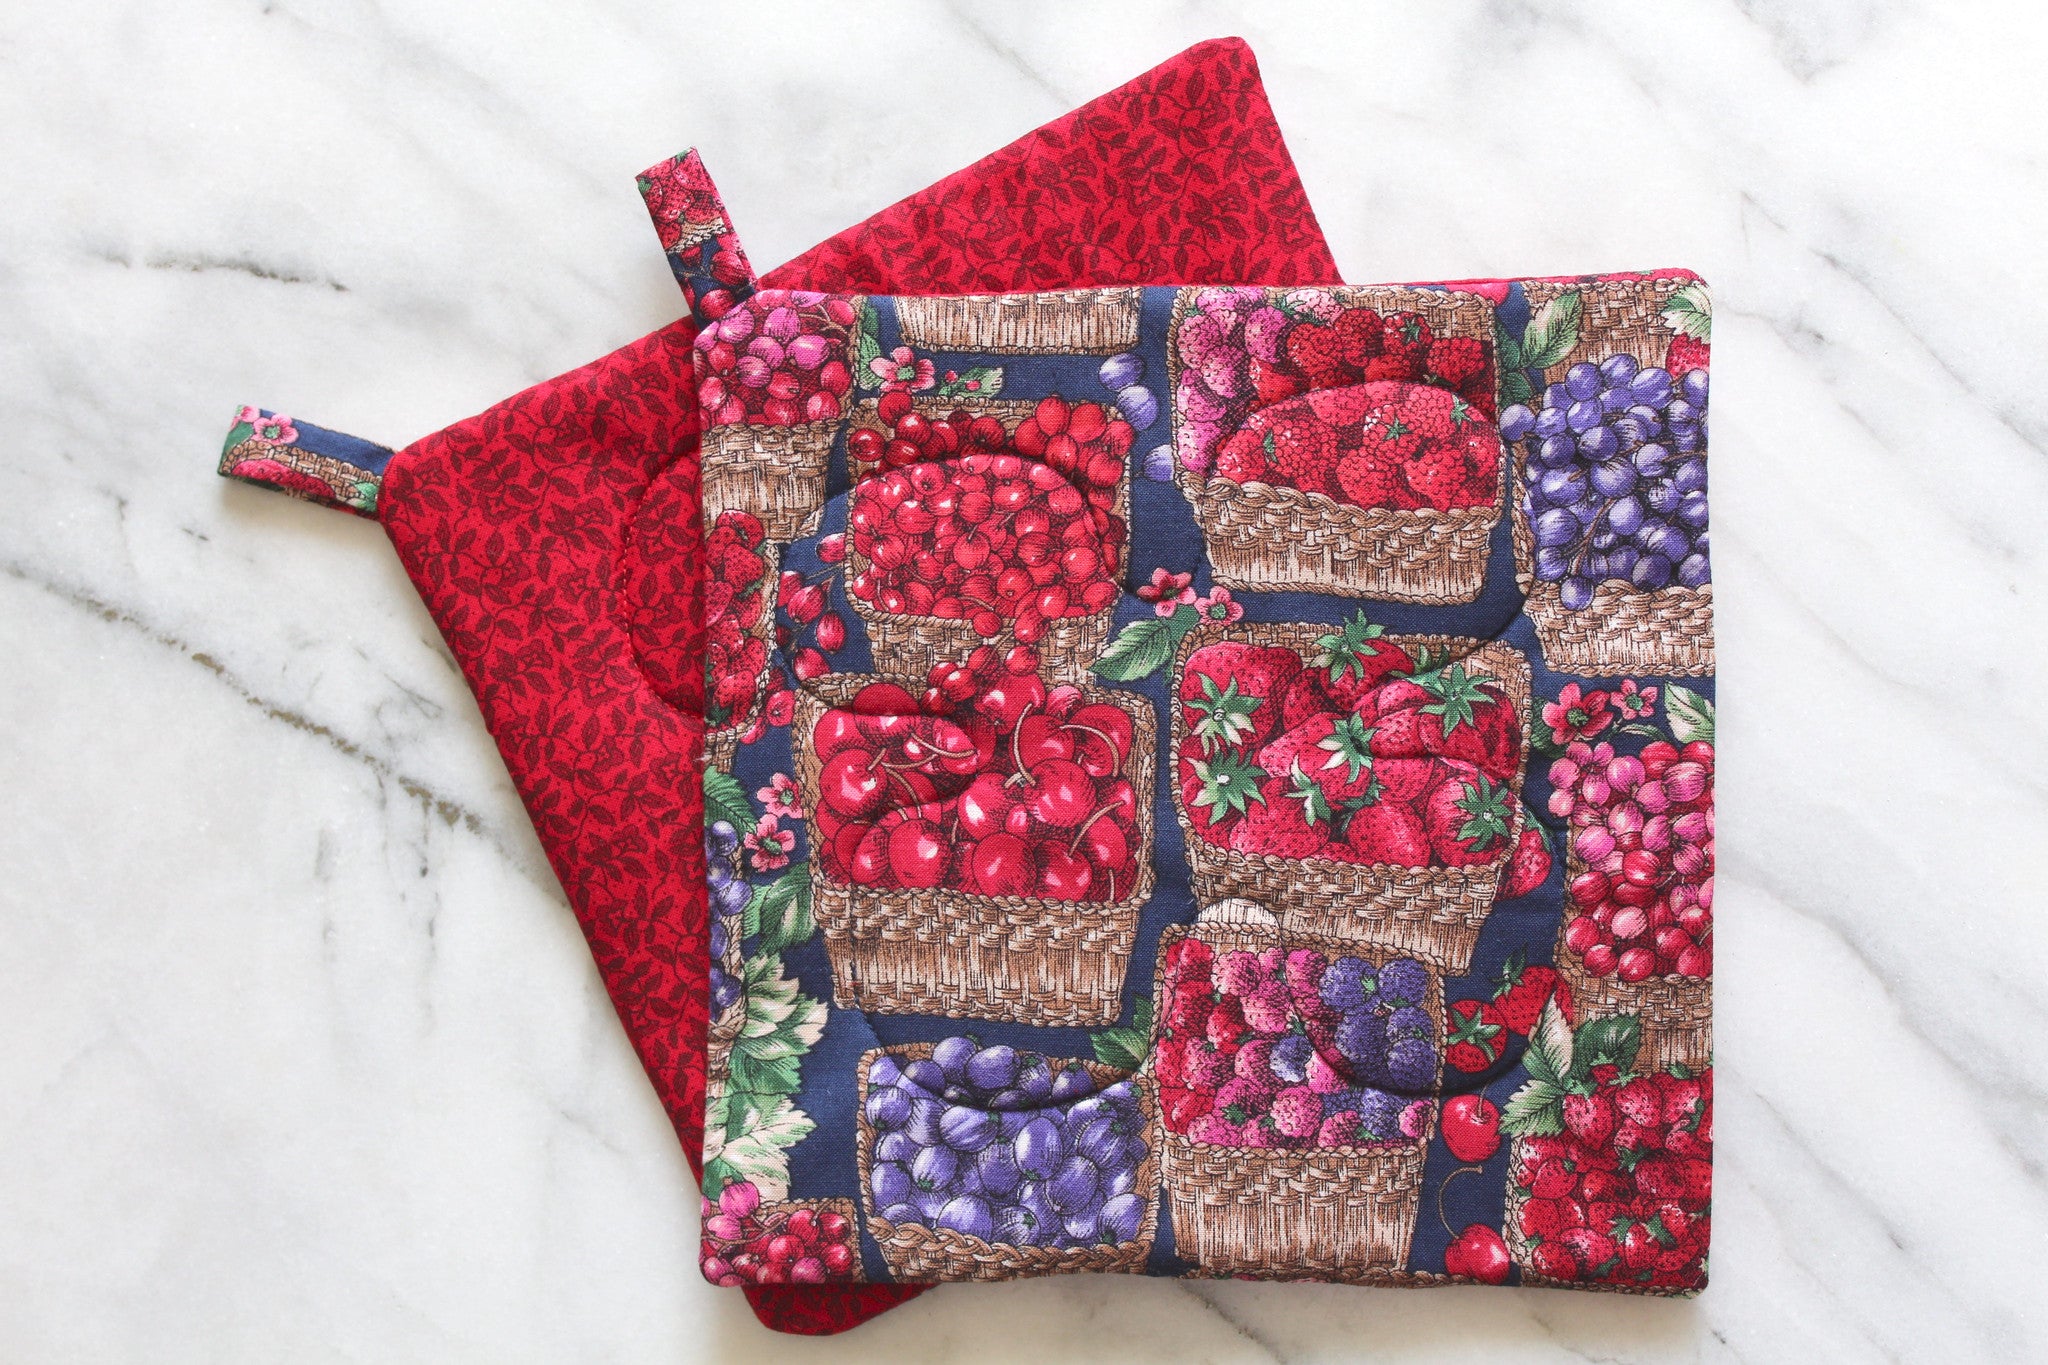 Just Picked Potholder-The Blue Peony-Category_Pot Holder,Color_Blue,Color_Raspberry,Color_Red,Department_Kitchen,Size_Traditional (Square),Theme_Food